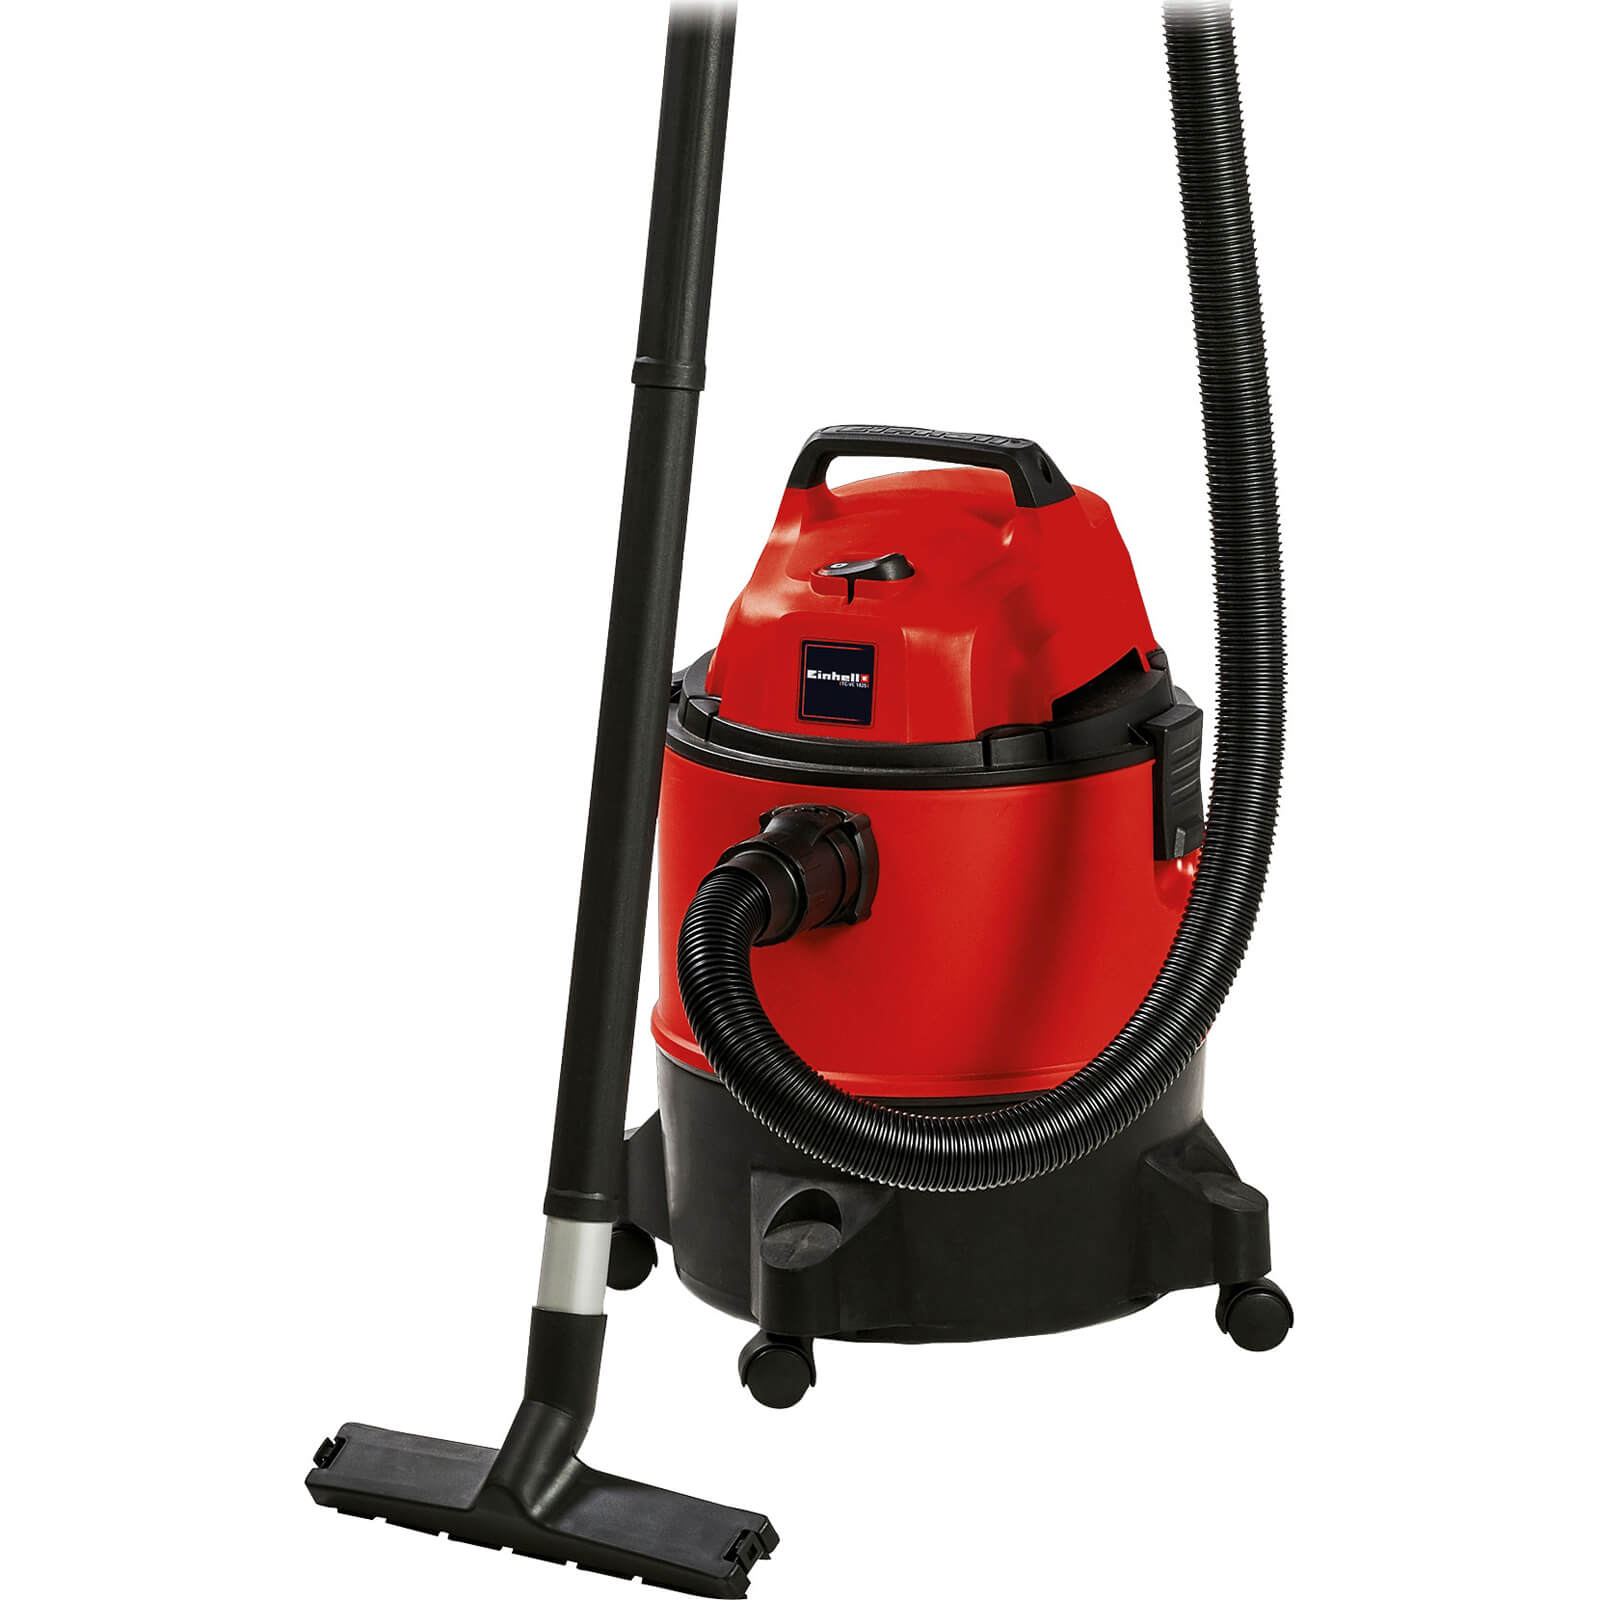 Image of Einhell TC-VC 1825 Plastic Wet and Dry Vacuum Cleaner 25L